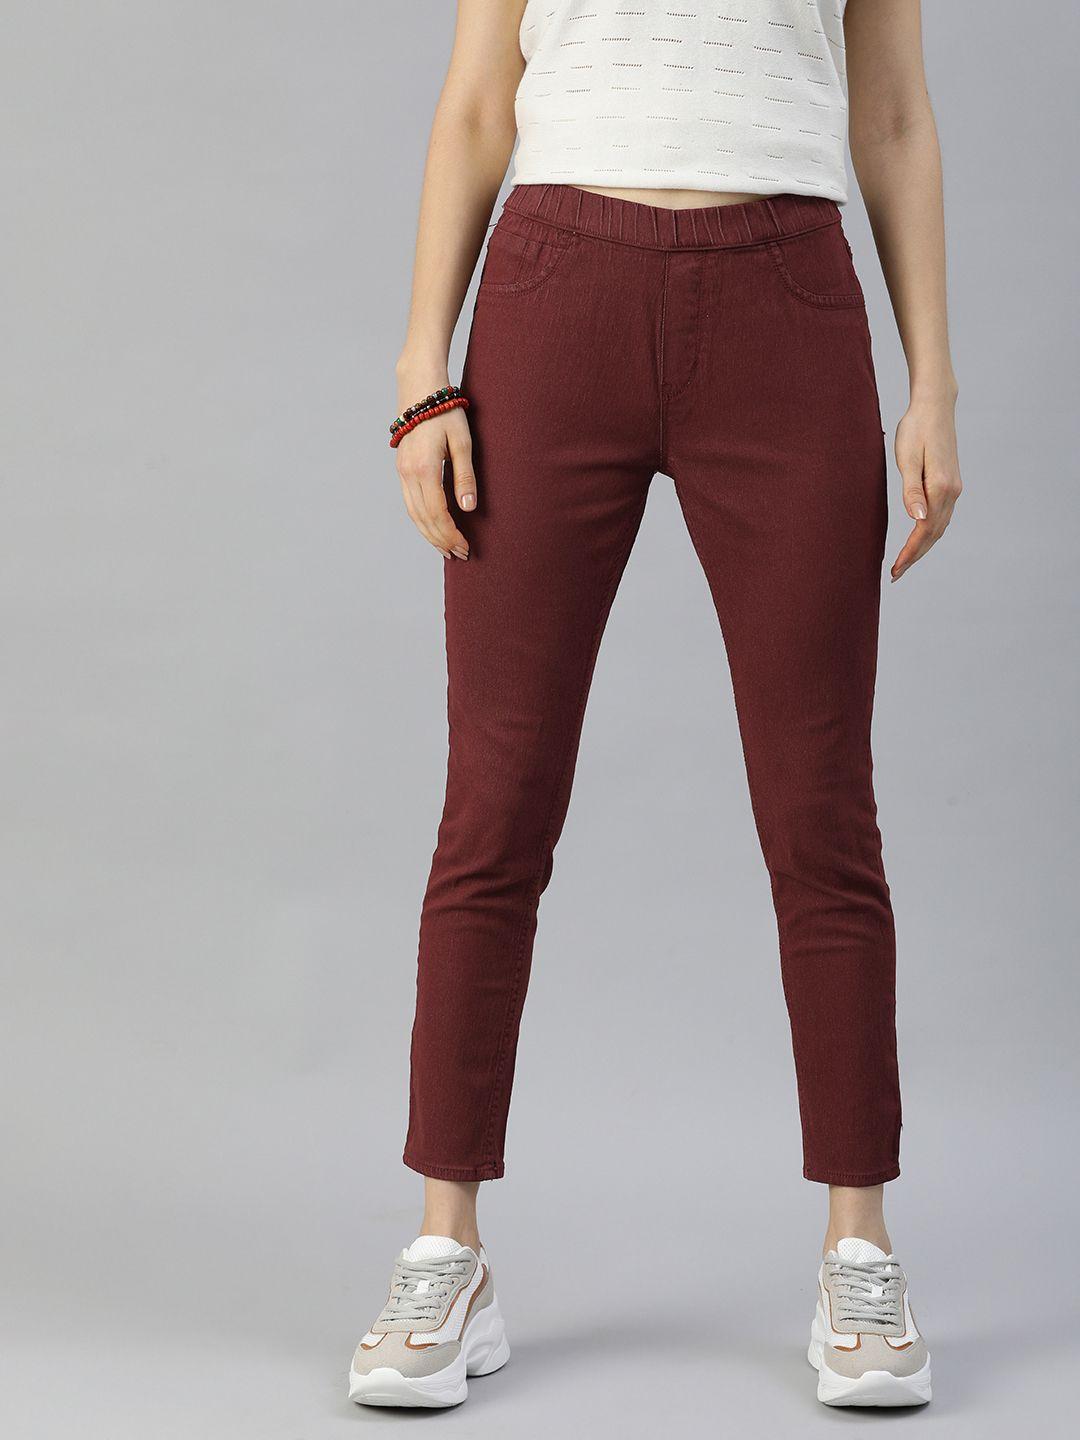 the roadster lifestyle co women maroon solid cropped jeggings